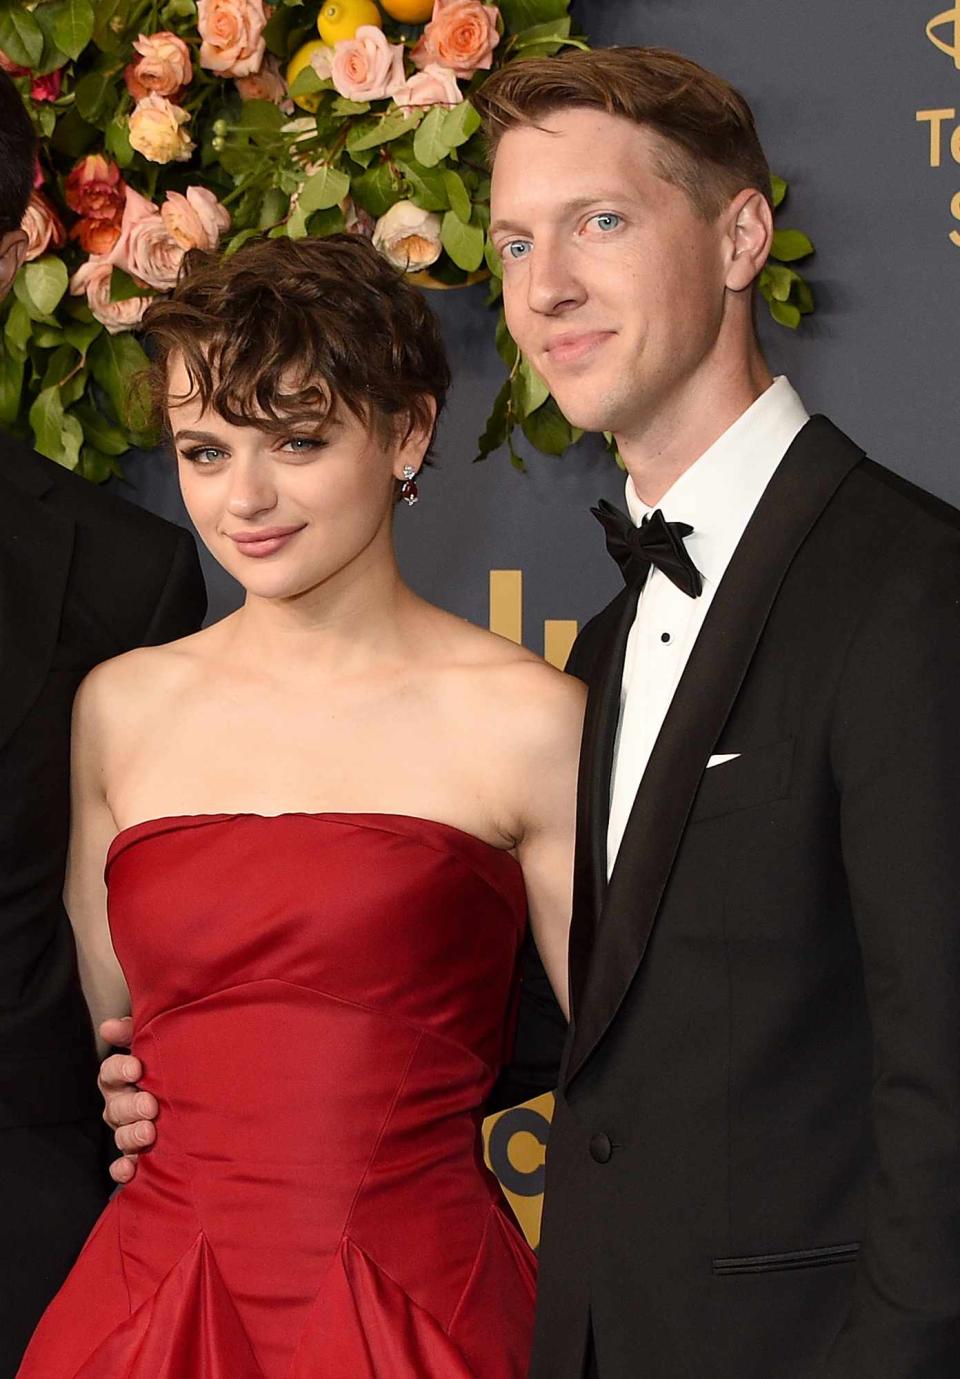 Joey King, and Steven Piet arrive at the Walt Disney Television Emmy Party on September 22, 2019 in Los Angeles, California